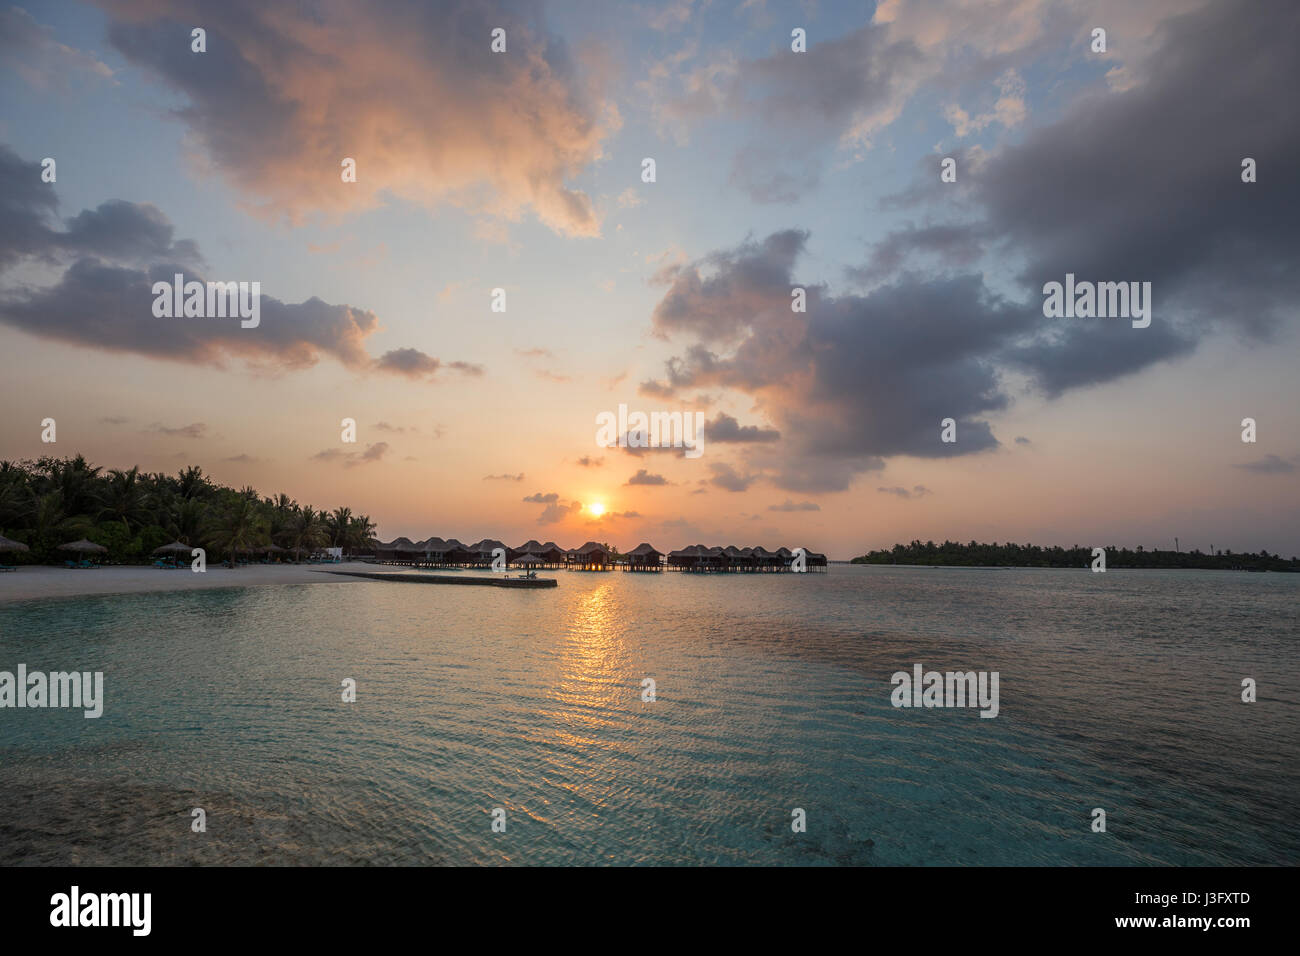 Tropical Paradise Sunset Sunrise View of Over Water Bungalows with Orange Red Sky Stock Photo